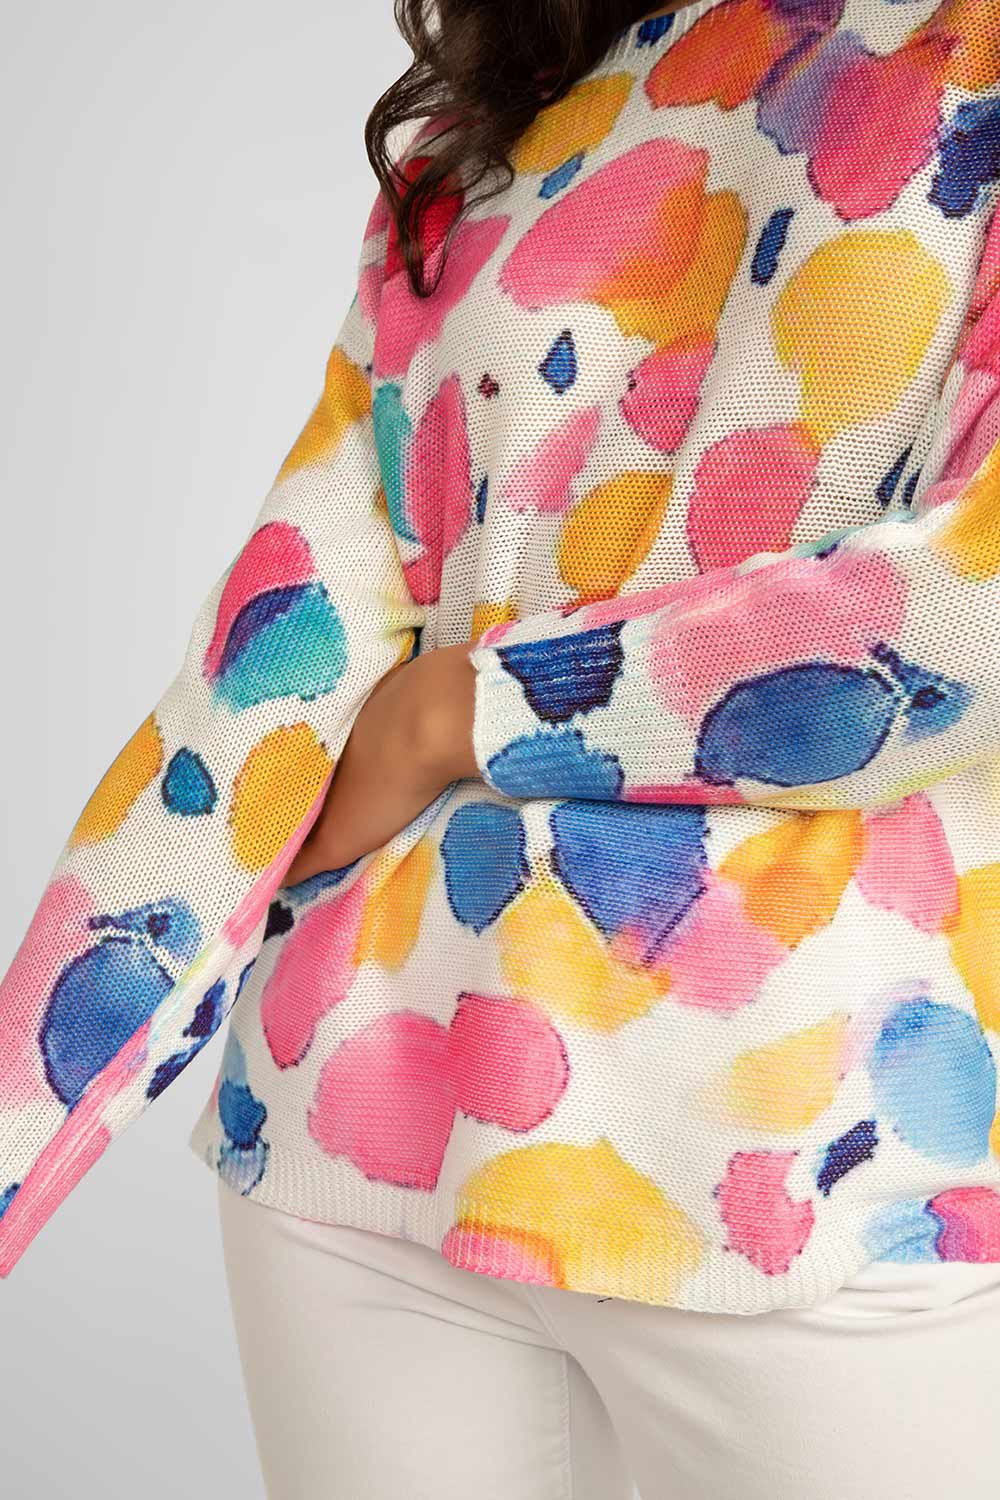 Front close up of Carre Noir (6802) Women's Long Sleeve Printed Dot Lightweight Pullover Sweater in a pink dot print accented by blues and yellows